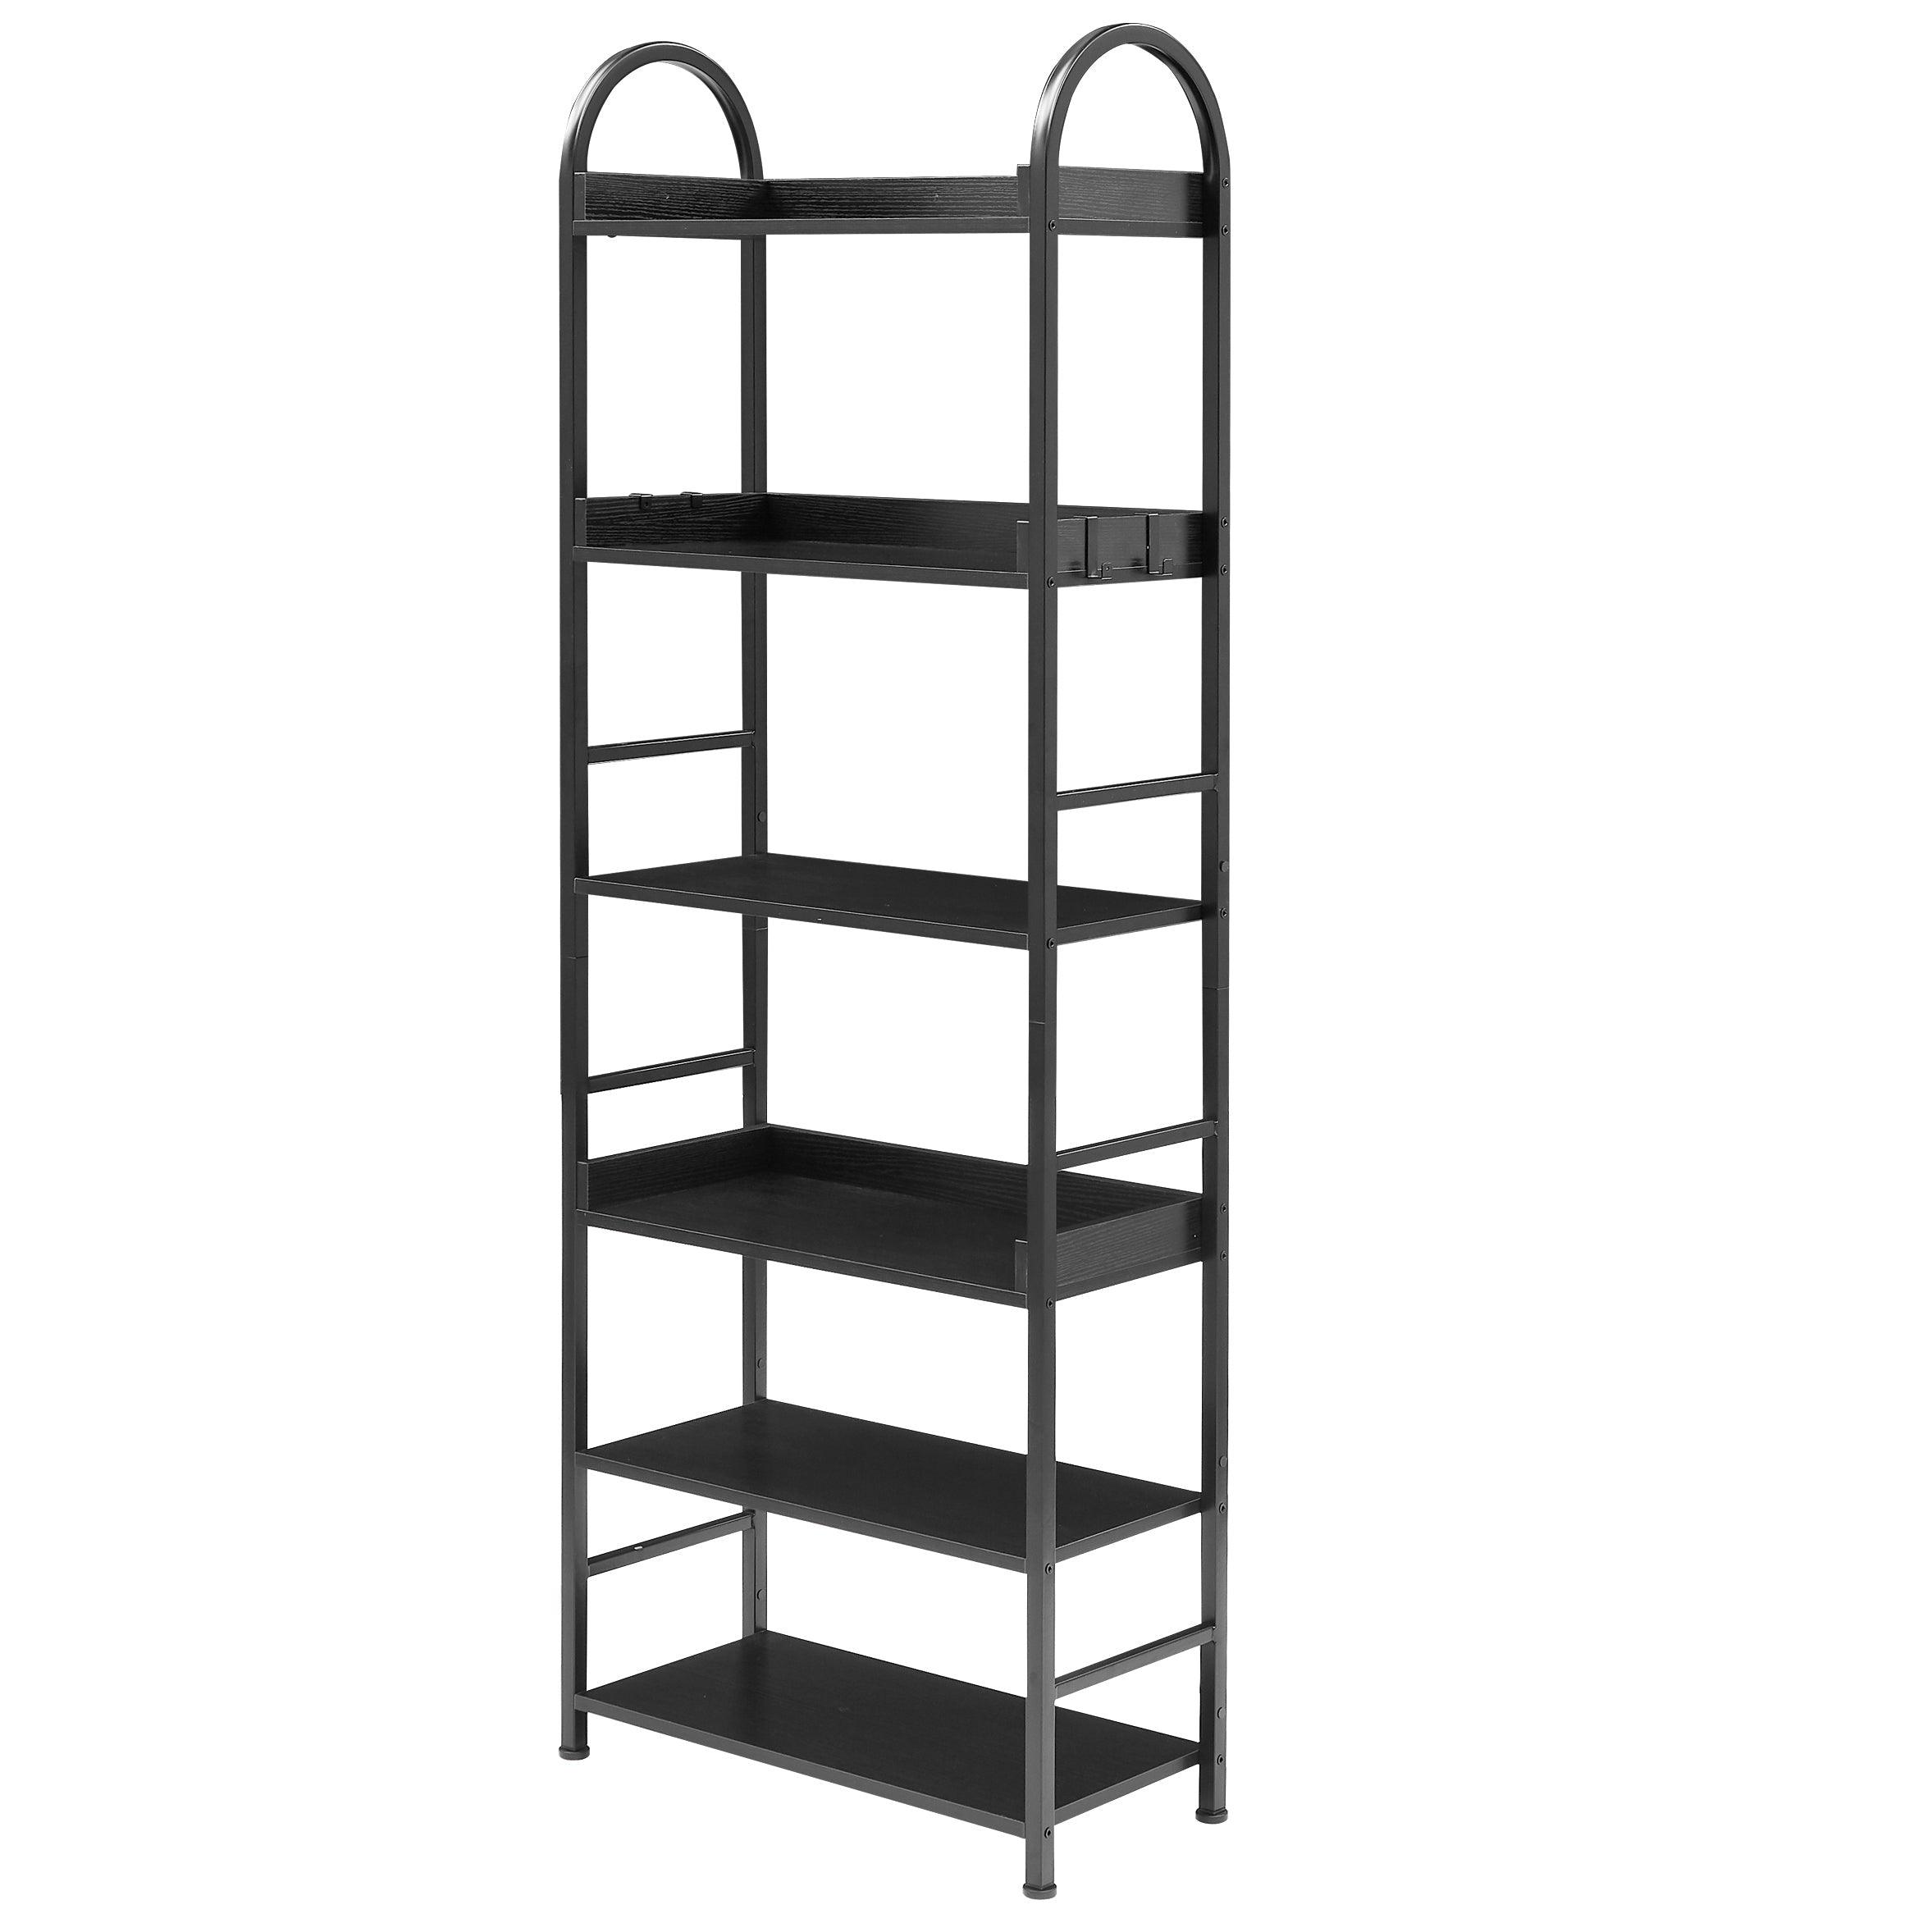 70.8 Inch Tall Bookshelf, 6-Tier Shelves With Round Top Frame, MDF Boards, Adjustable Foot Pads, Black LamCham